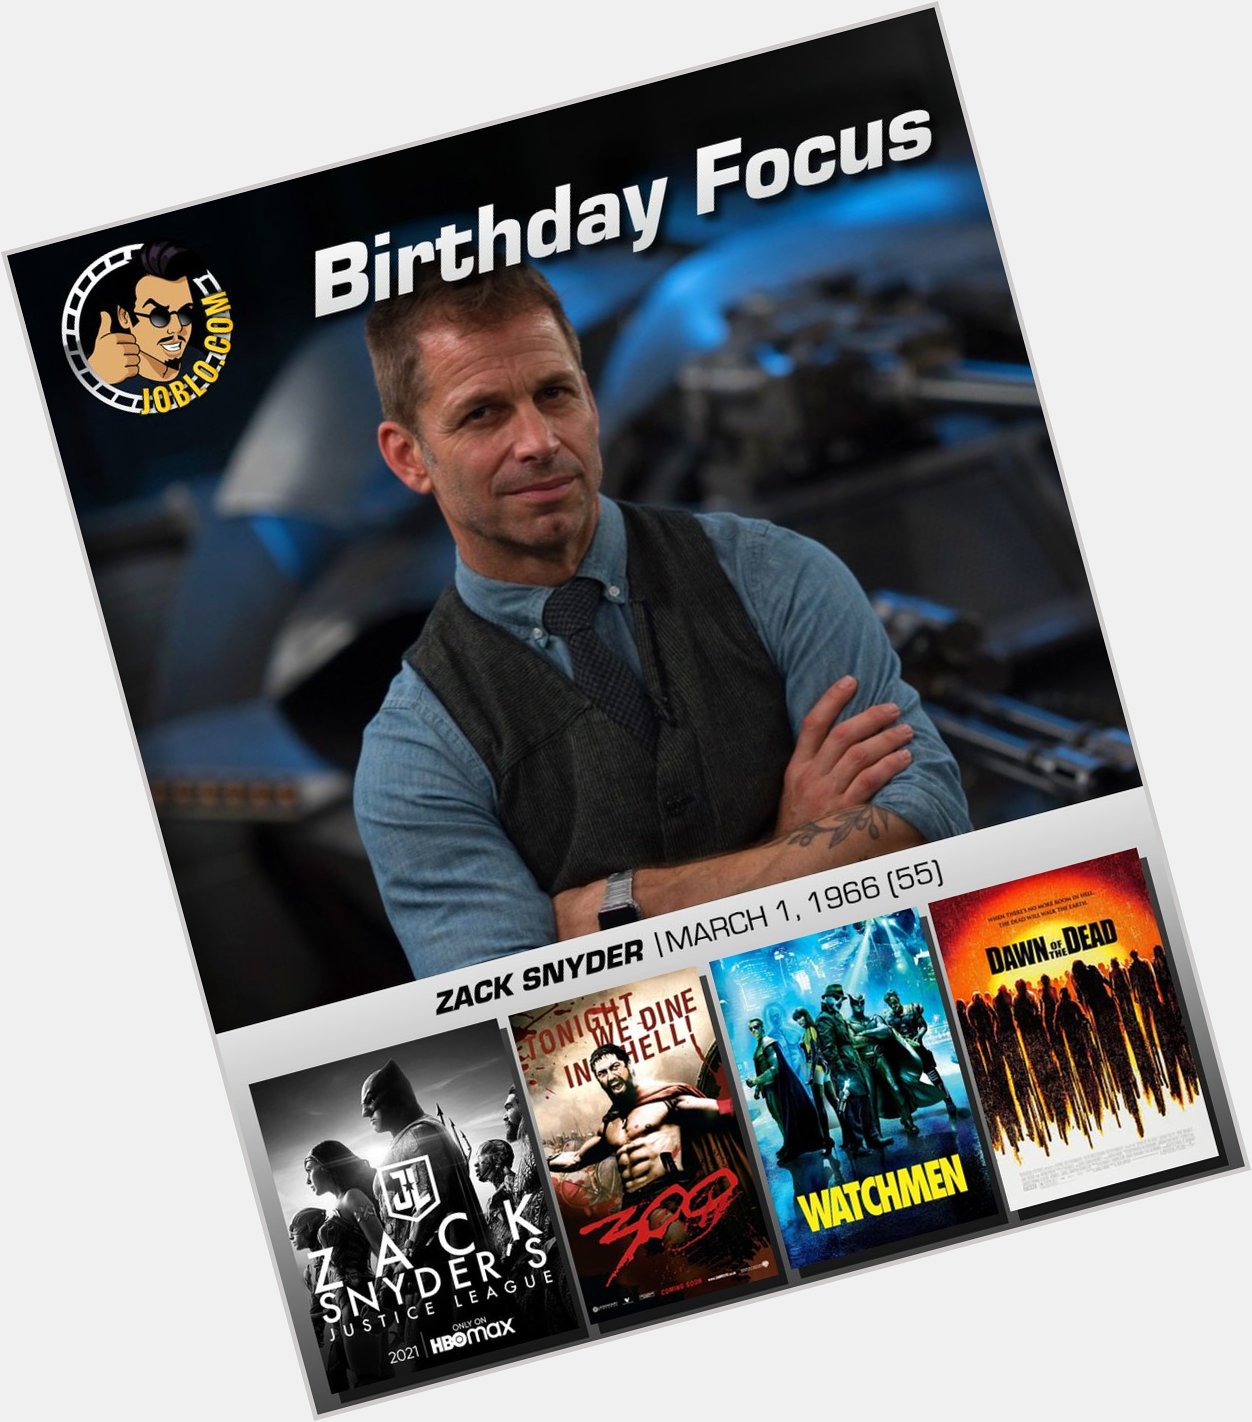 Wishing Zack Snyder a very happy 55th birthday!

Who\s excited for the Snyder cut? 